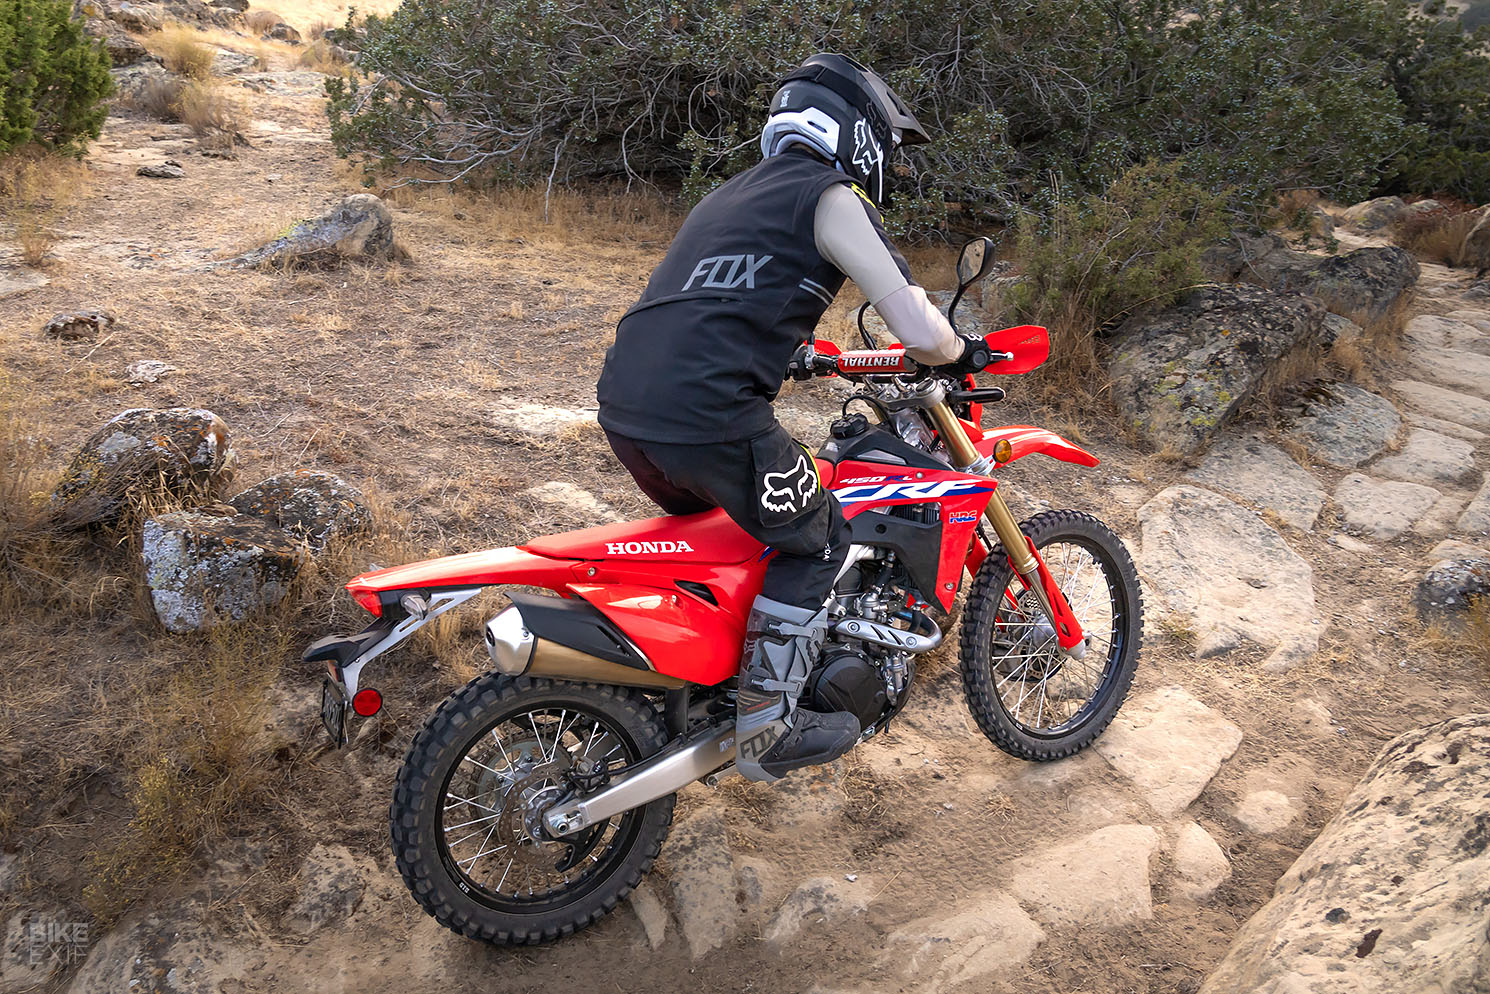 Dirt Bike vs Motorcycle: What Makes a Dirt Bike Different from a